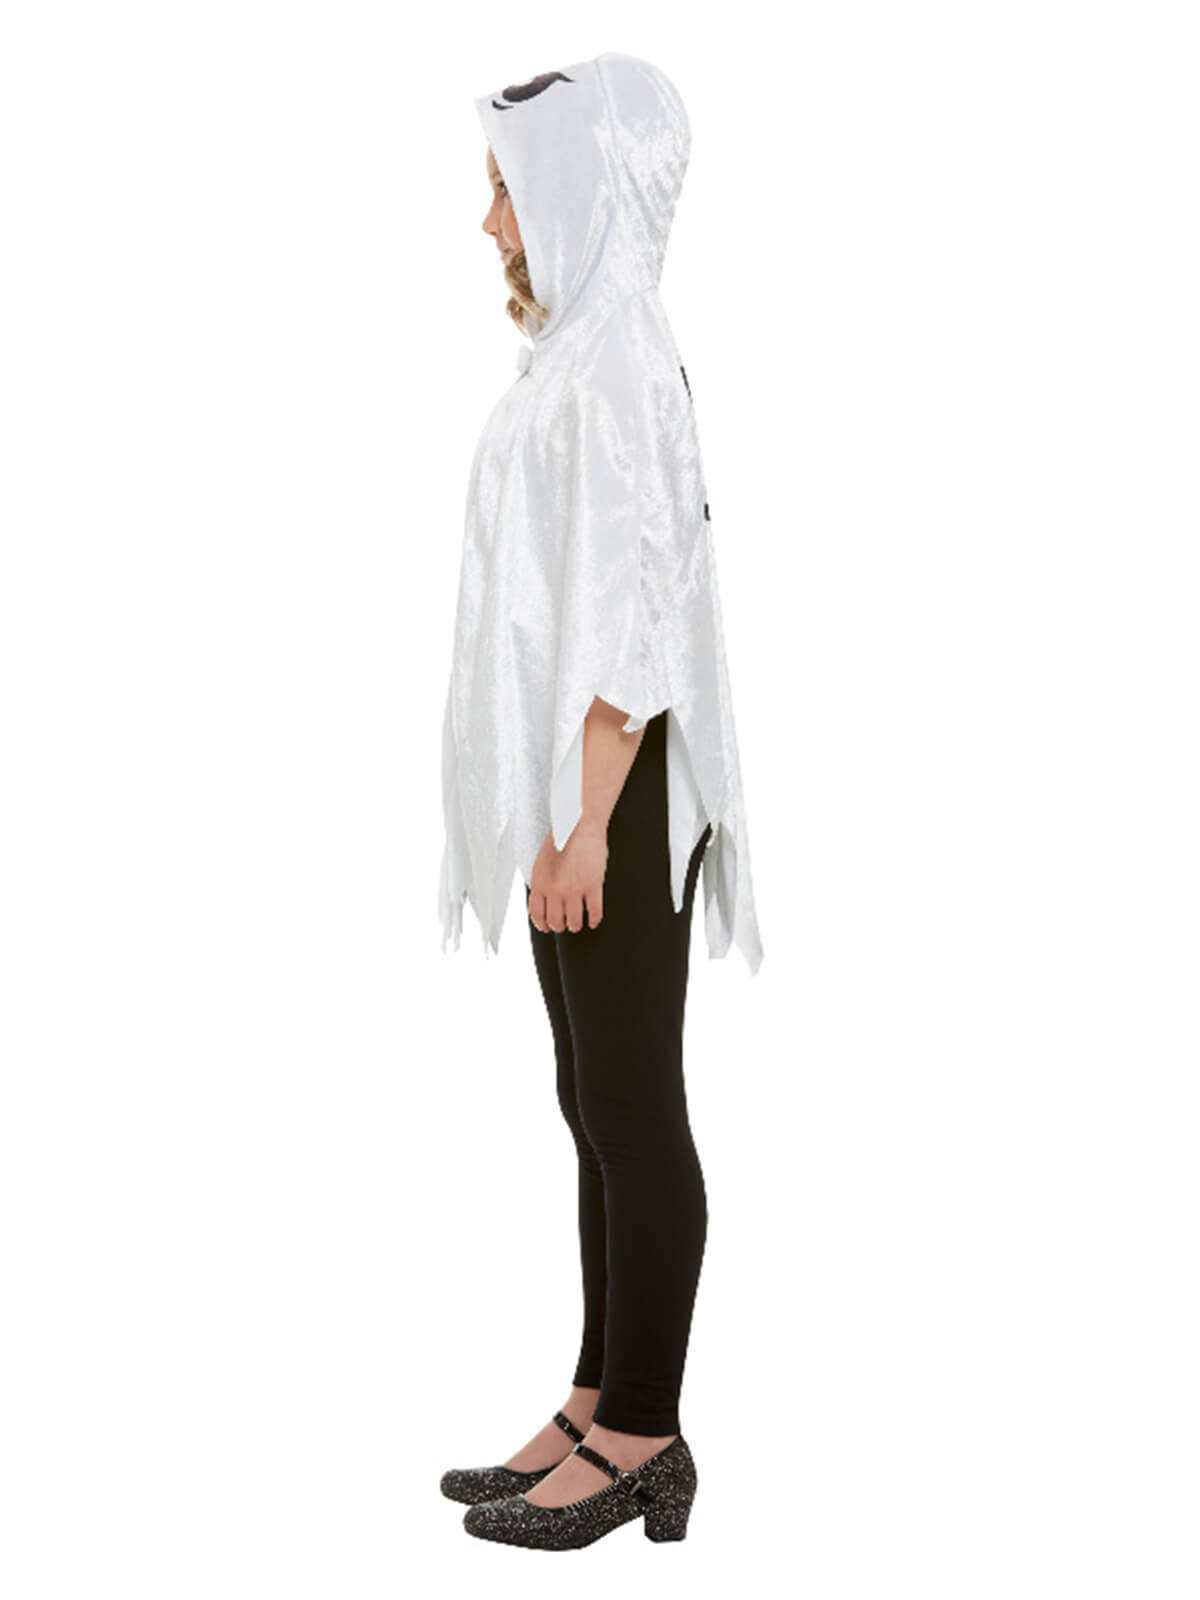 Ghost Hooded Cape, White Halloween Costume